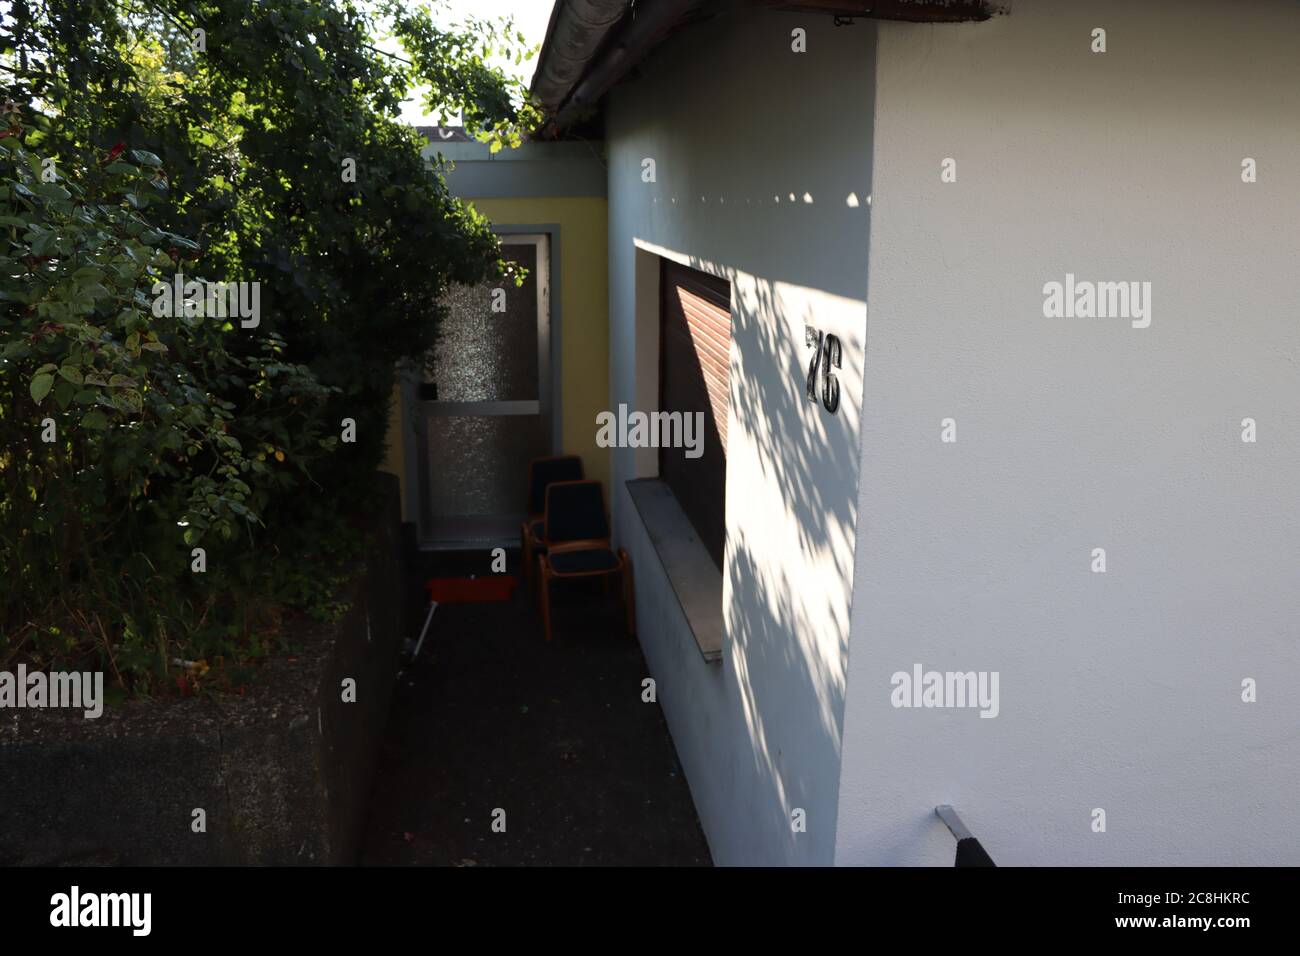 Schwerte, Germany. 23rd July, 2020. In Schwerte - village Ergste - there was an extortionate human robbery under Poland. You detained a compatriot in the apartment and tortured him. The judge issued an arrest warrant. (Photo by Lukas Pohland/Pacific Press) Credit: Pacific Press Agency/Alamy Live News Stock Photo